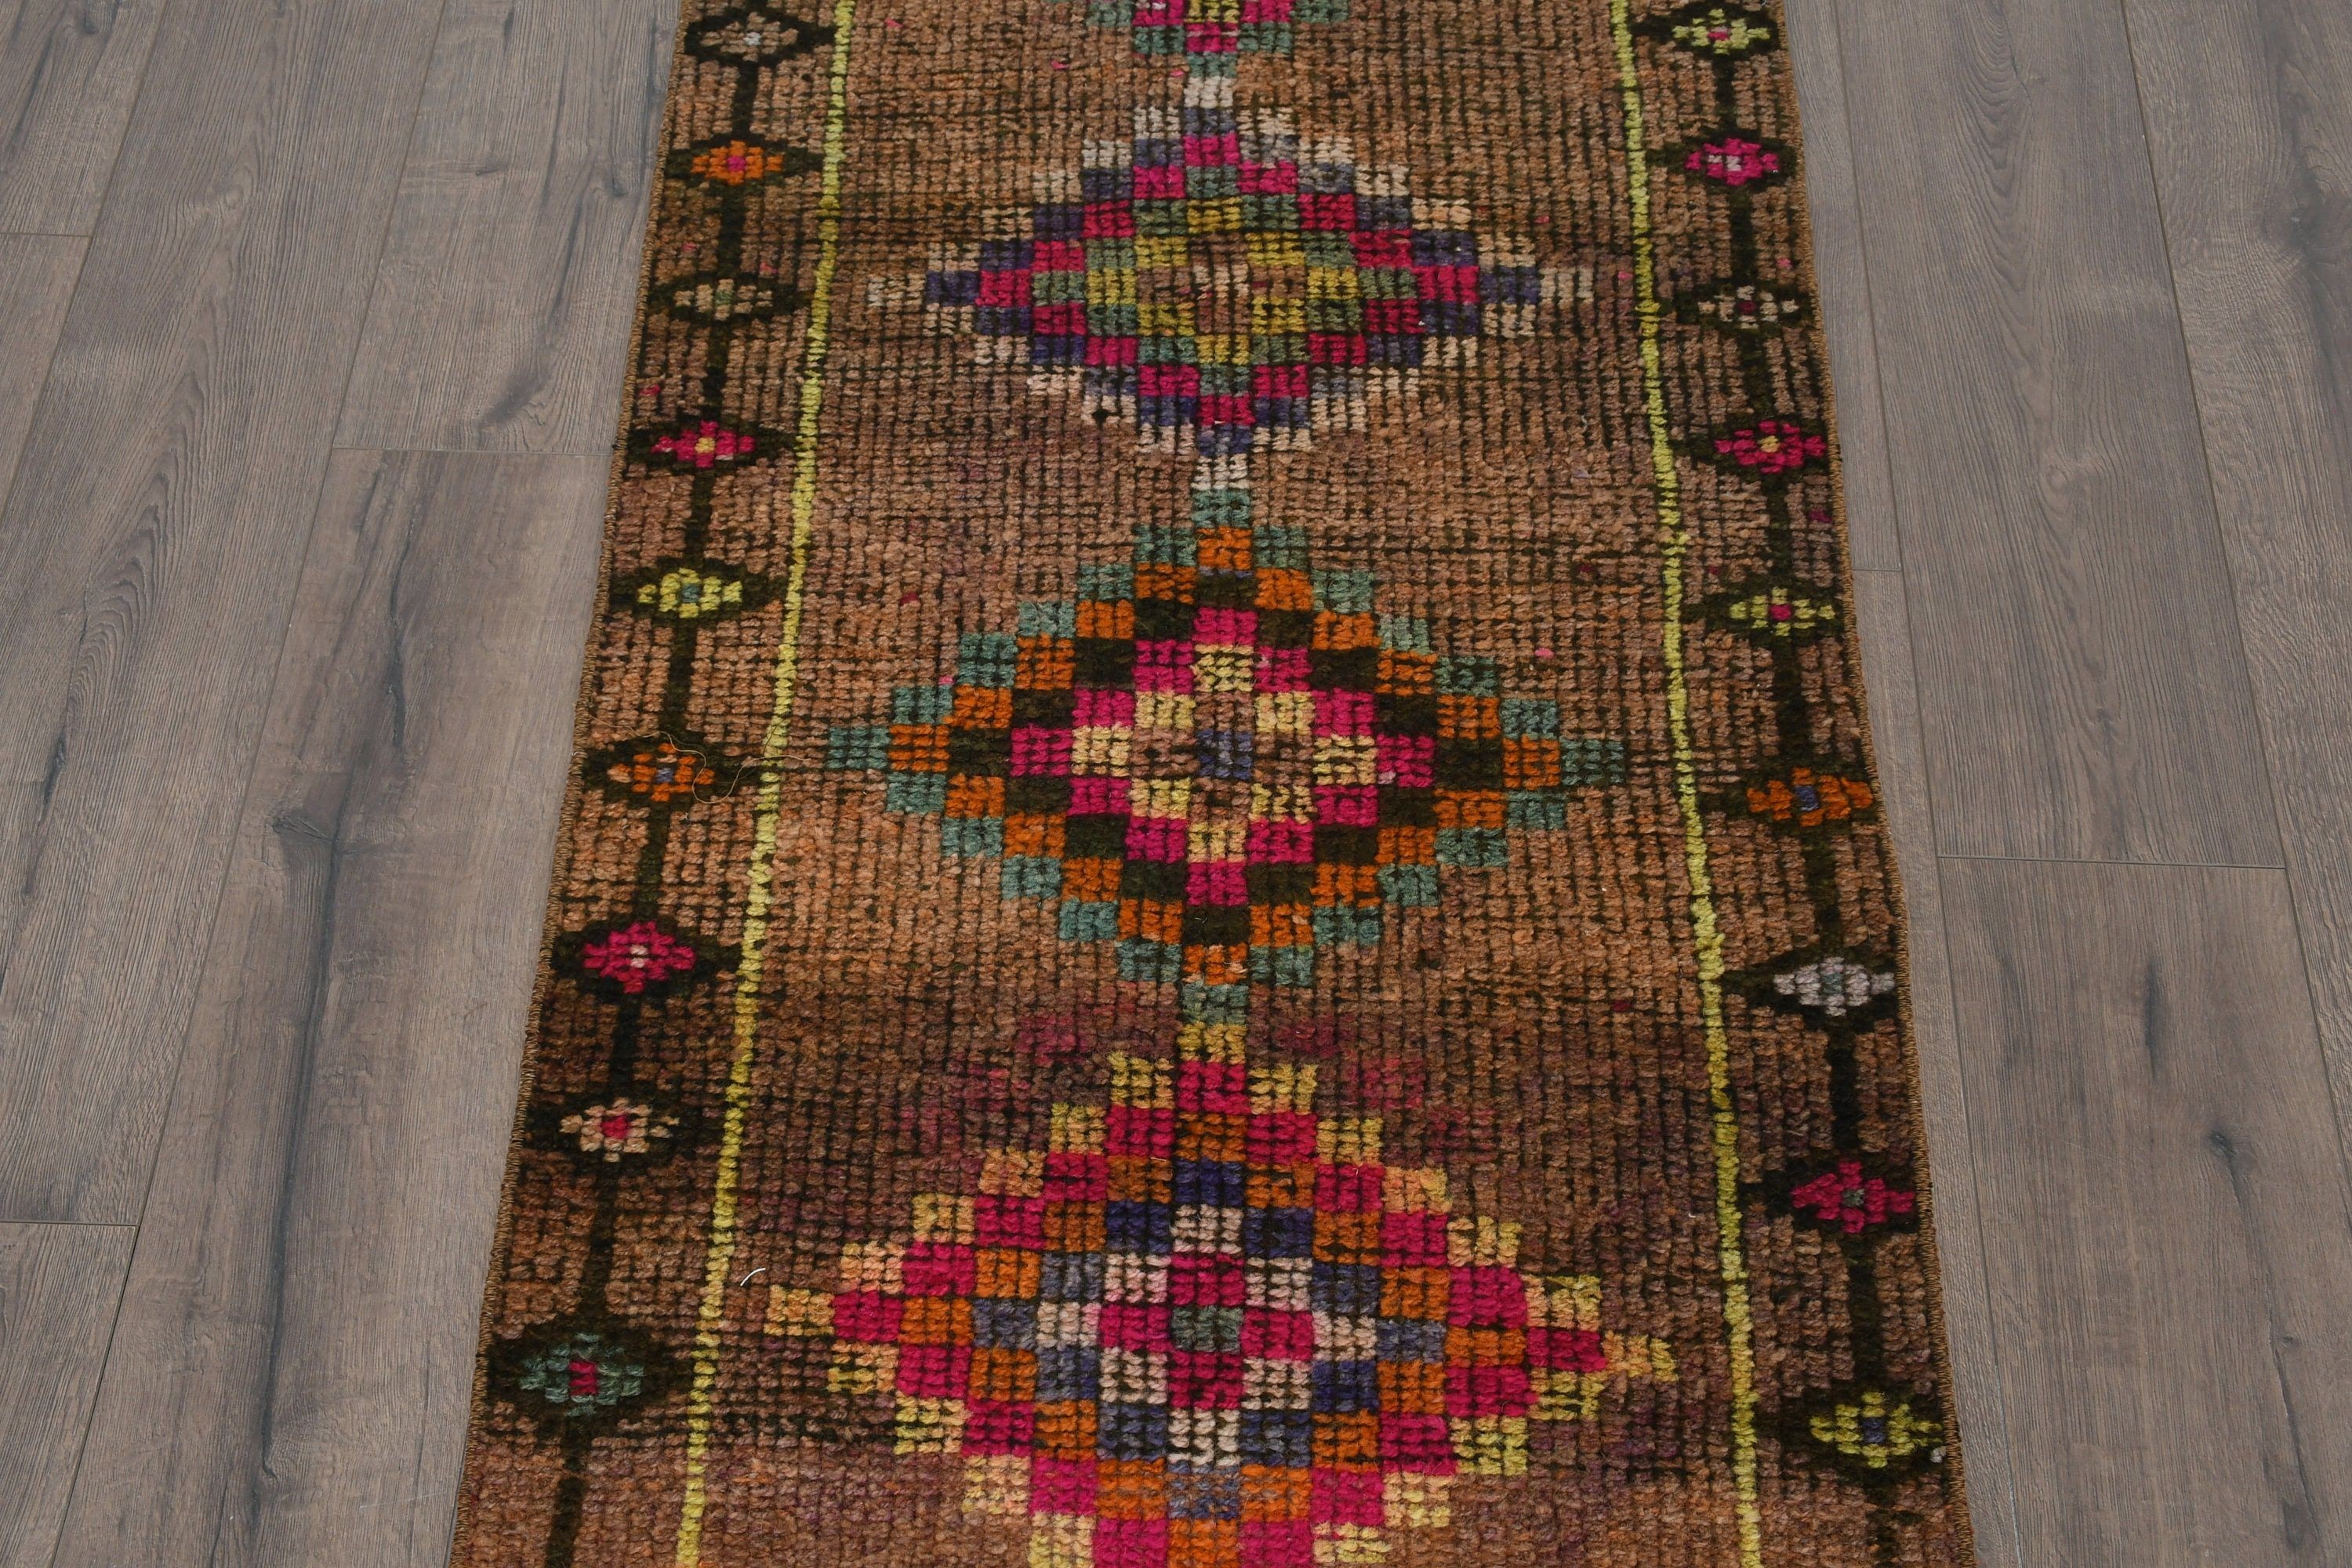 Cool Rug, Turkish Rug, Kitchen Rug, Authentic Rugs, Antique Rug, Brown  2.4x10.5 ft Runner Rug, Rugs for Stair, Vintage Rug